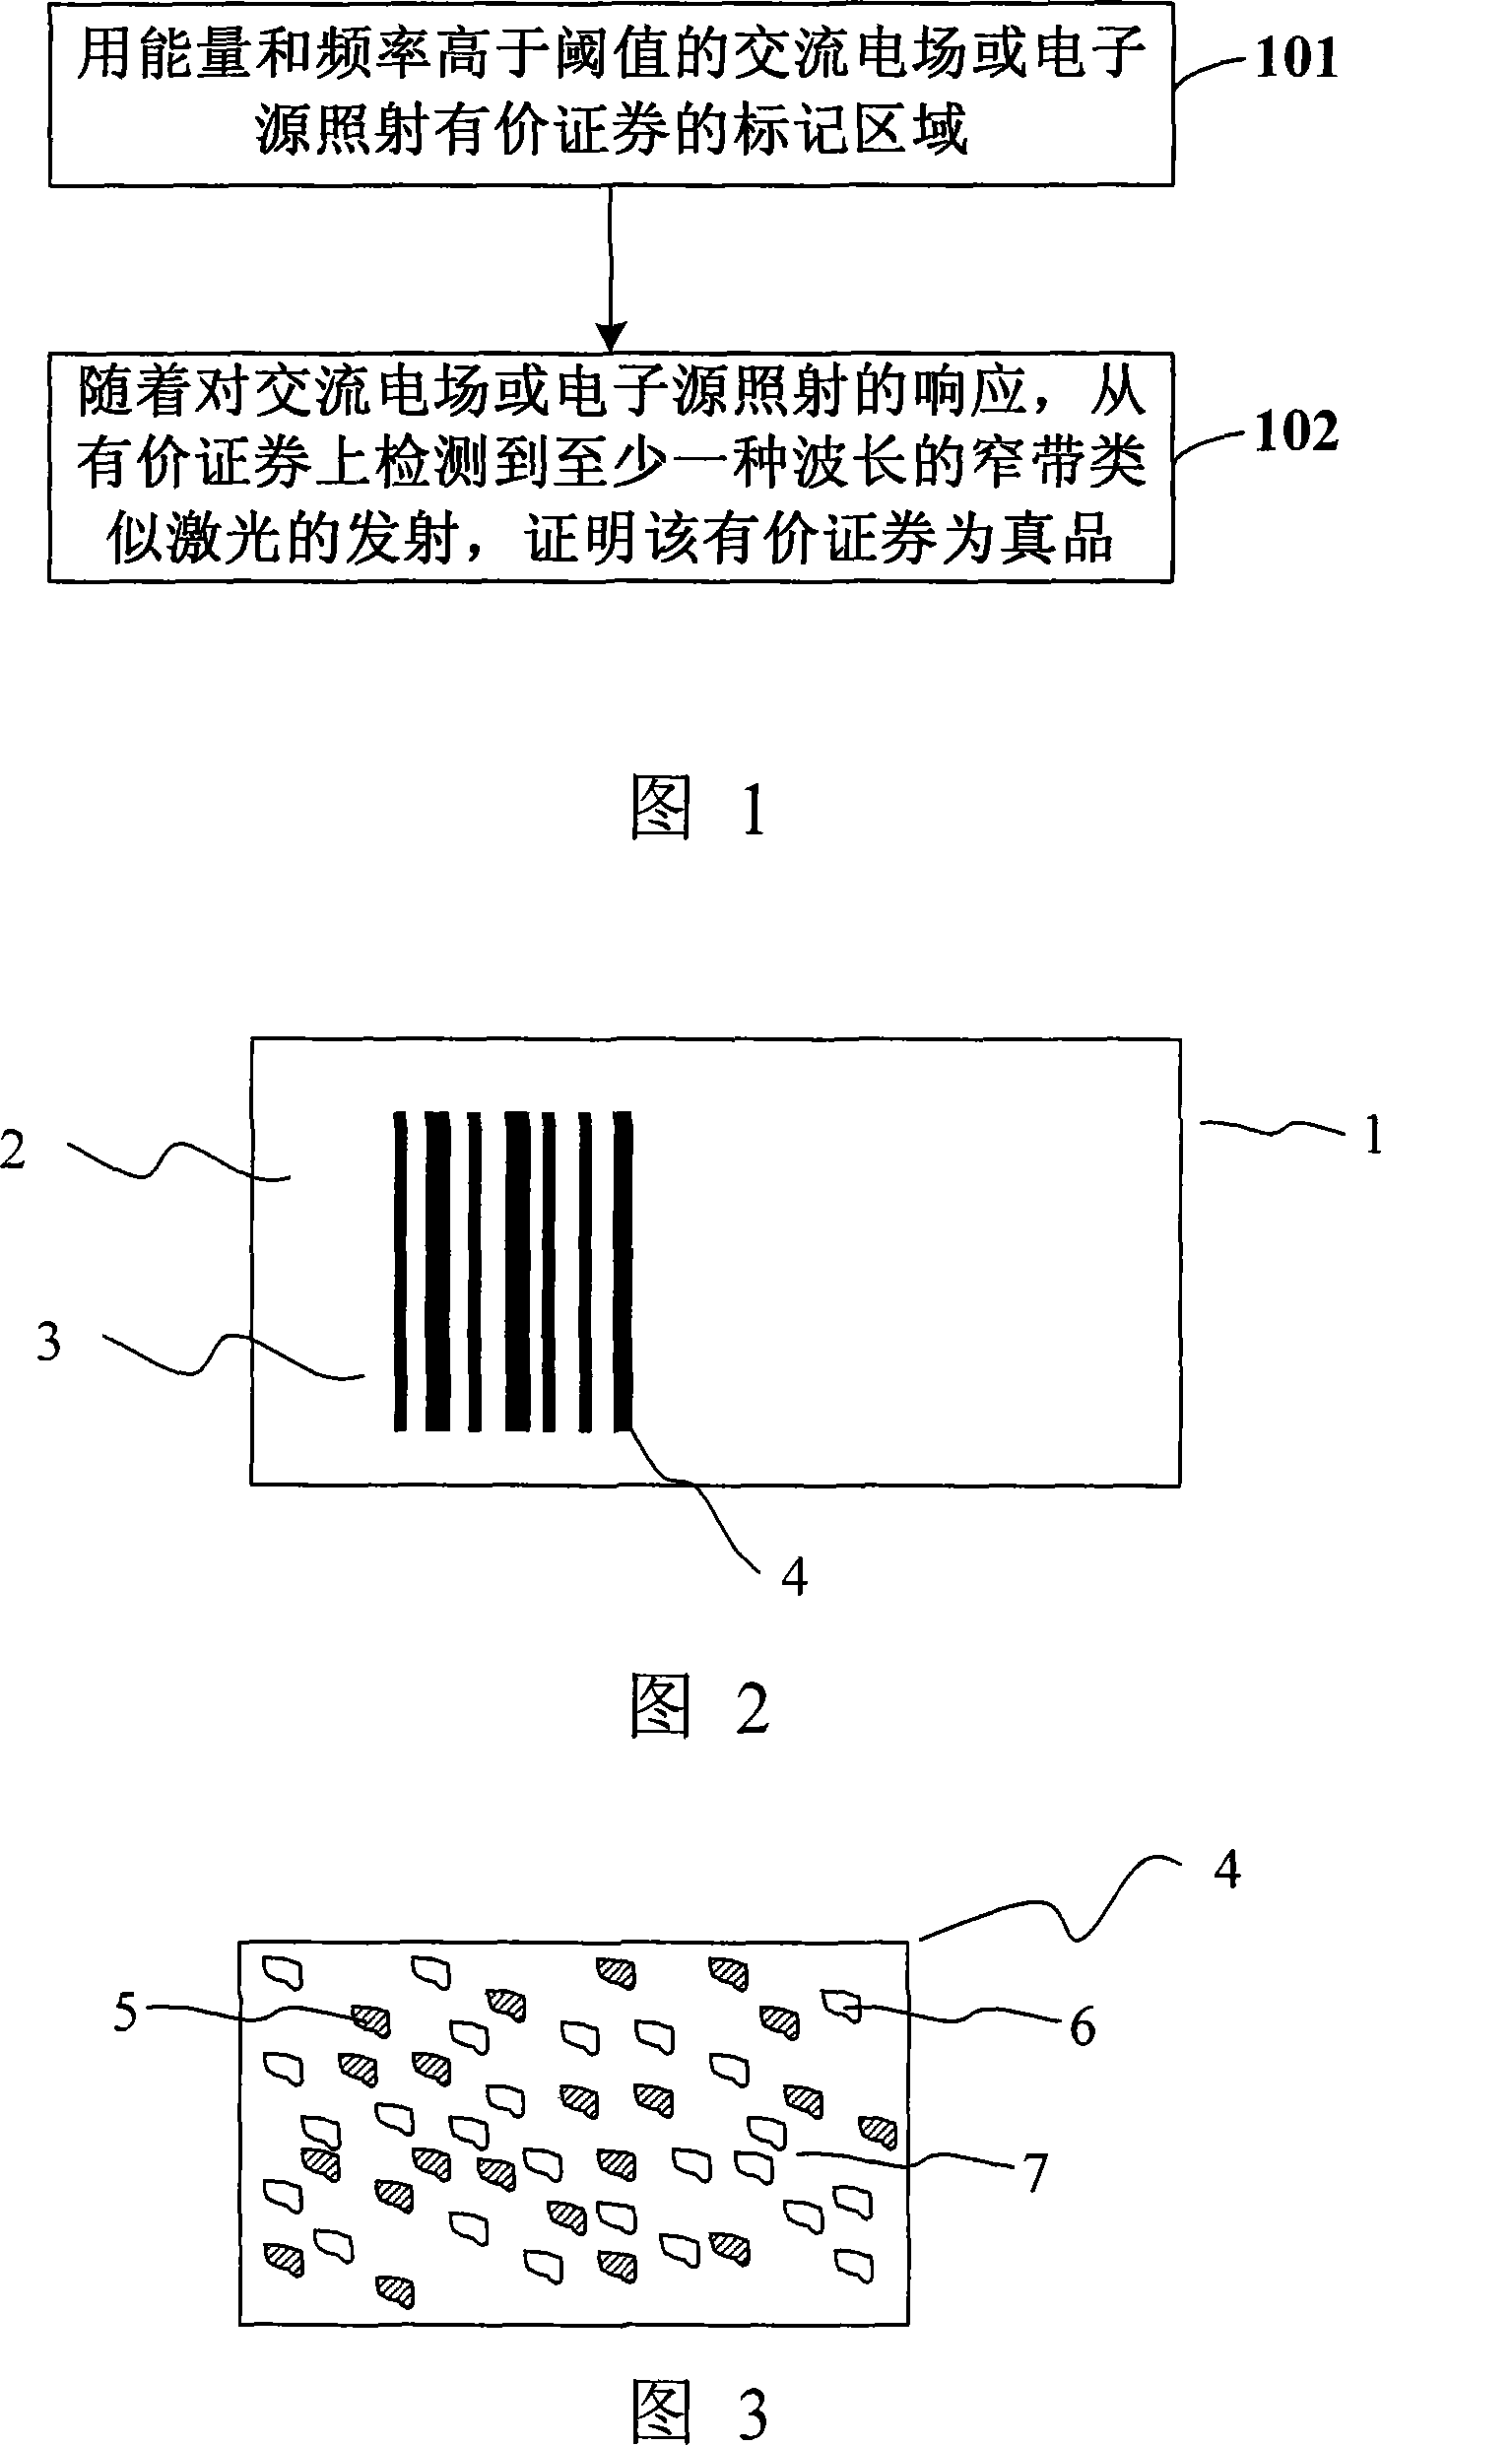 Method for authenticating document of value